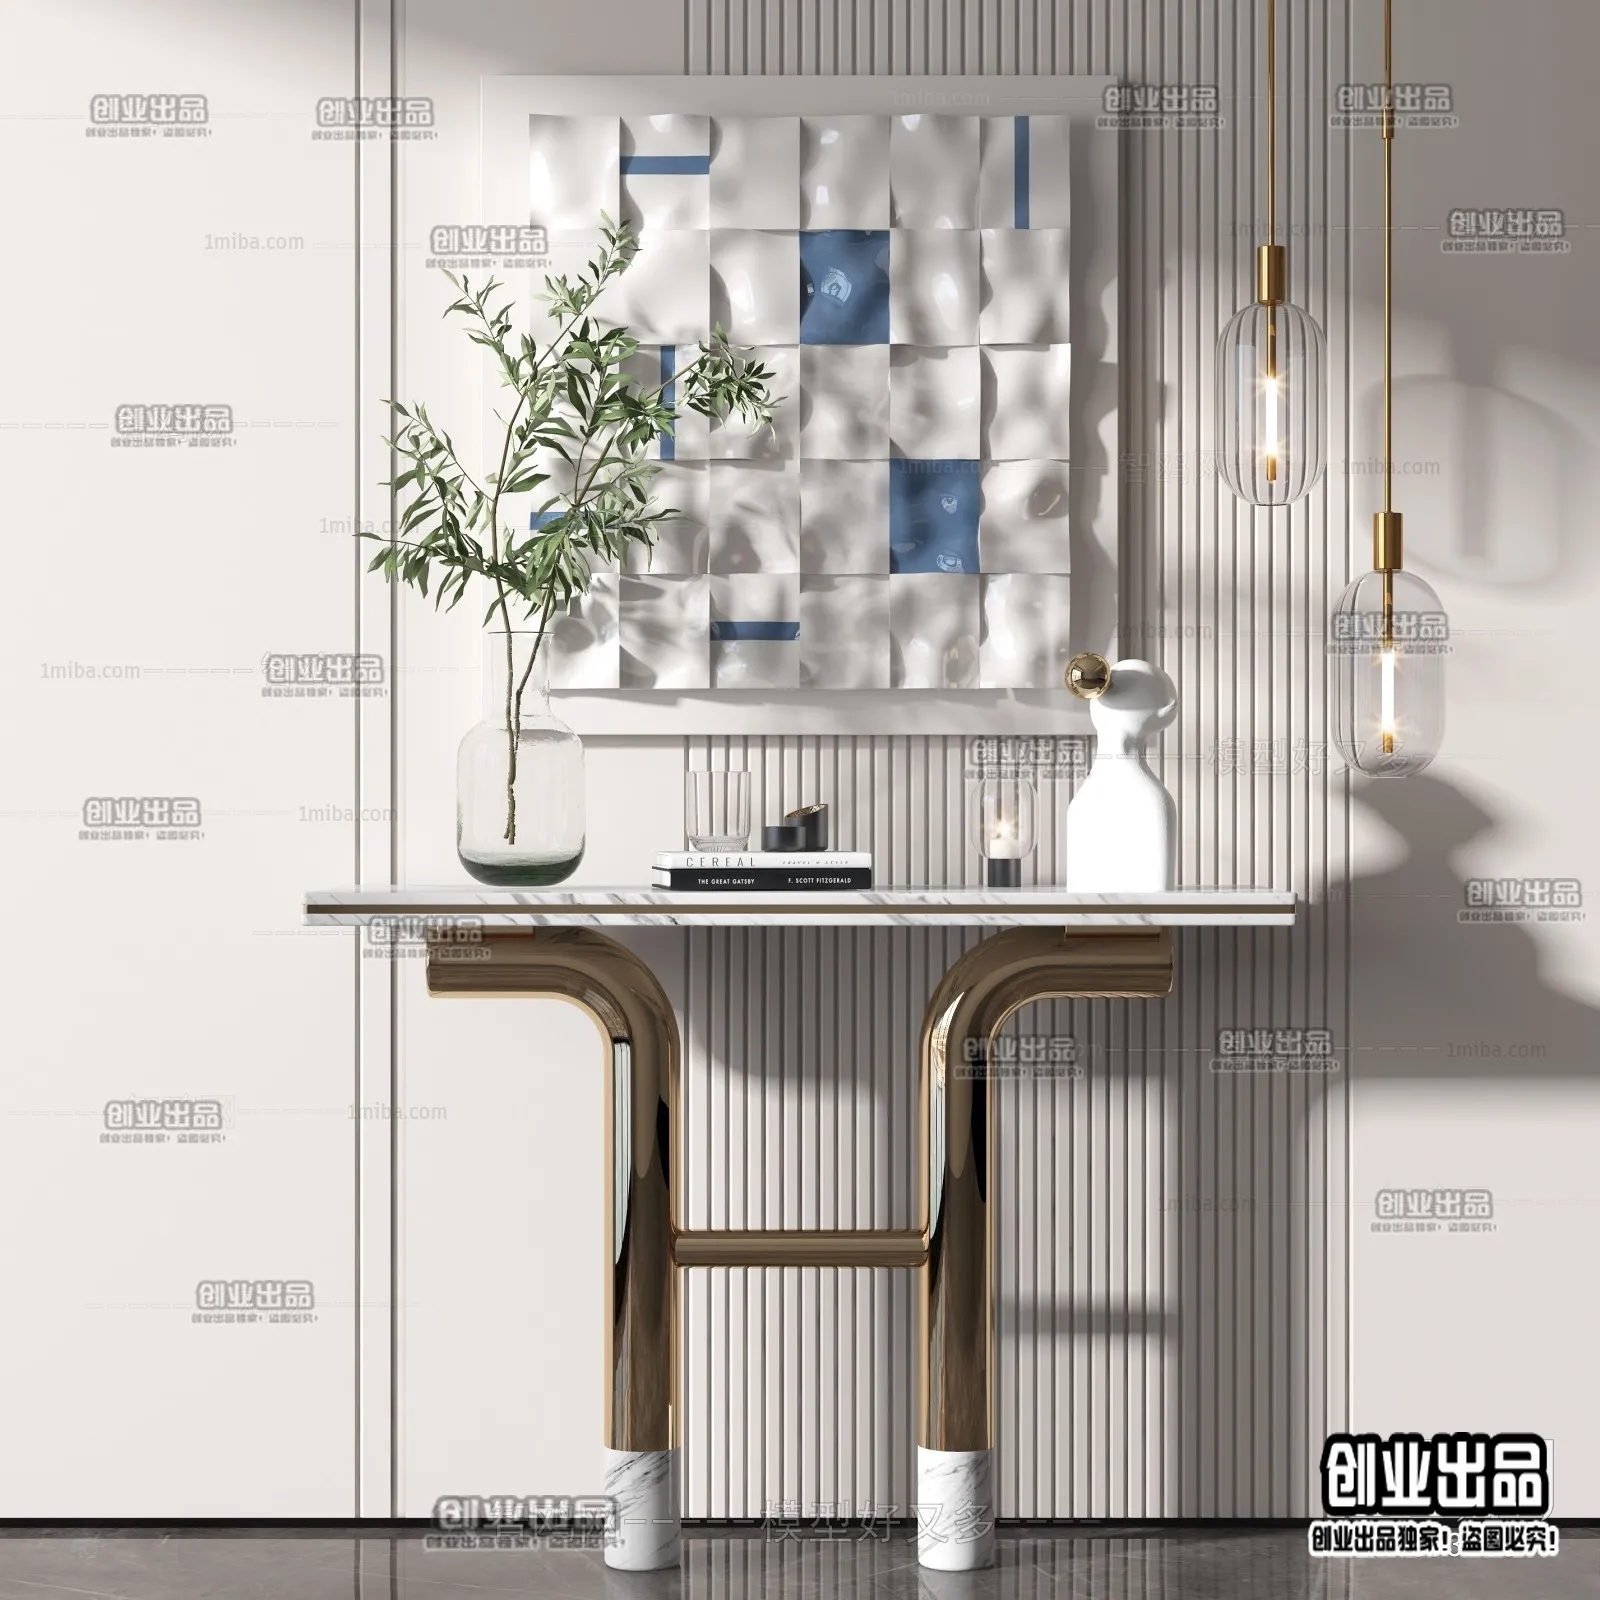 CONSOLE TABLE – 16 – FURNITURE 3D MODELS 2022 (VRAY)